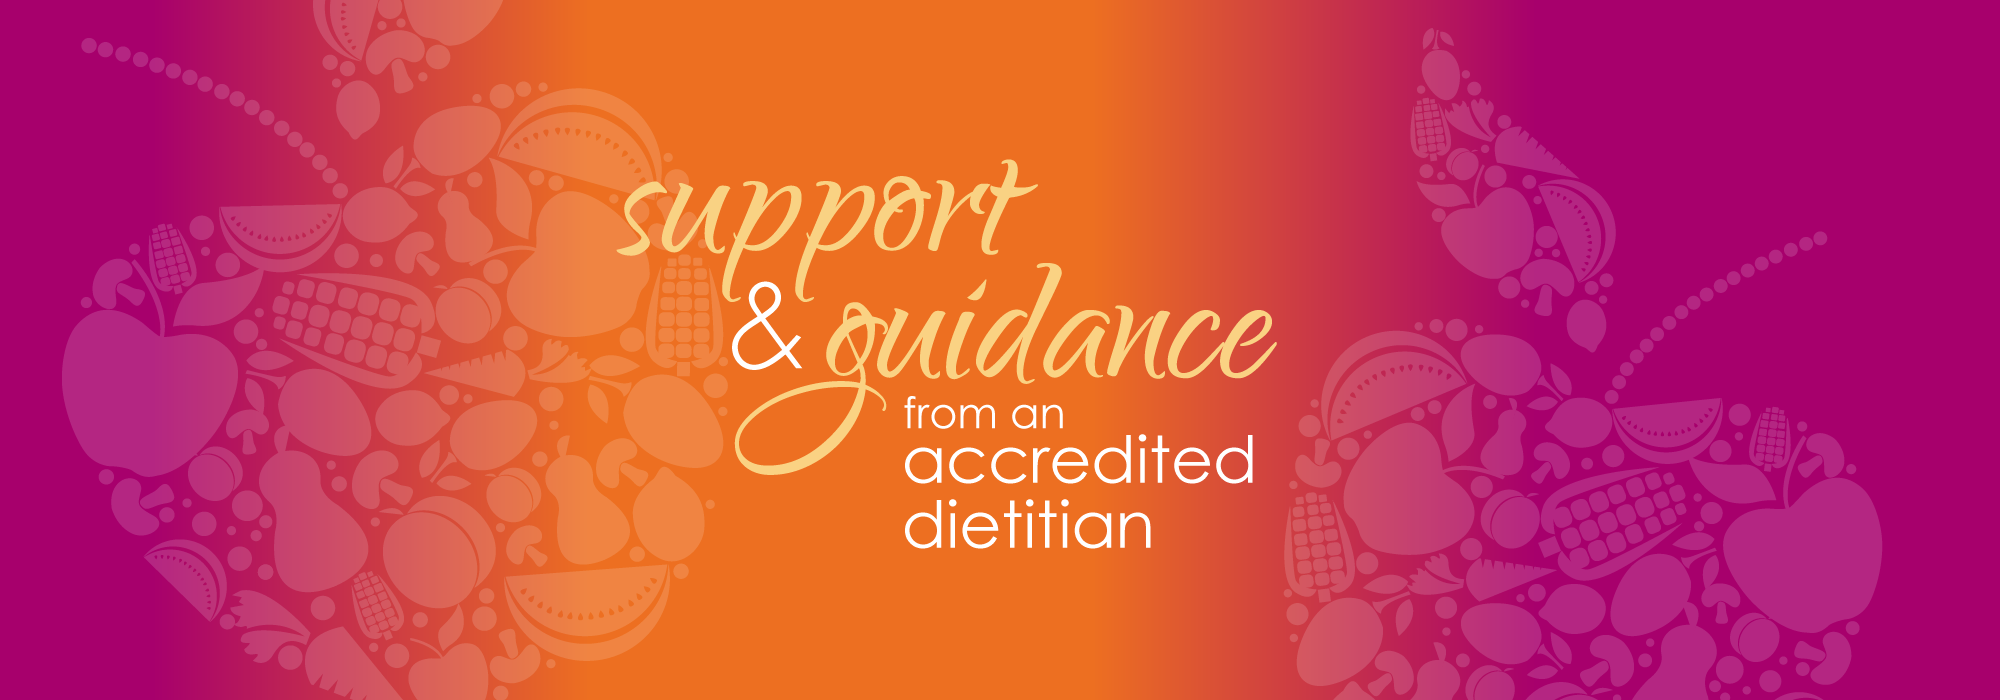 Support & Guidance from an accredited dietitian